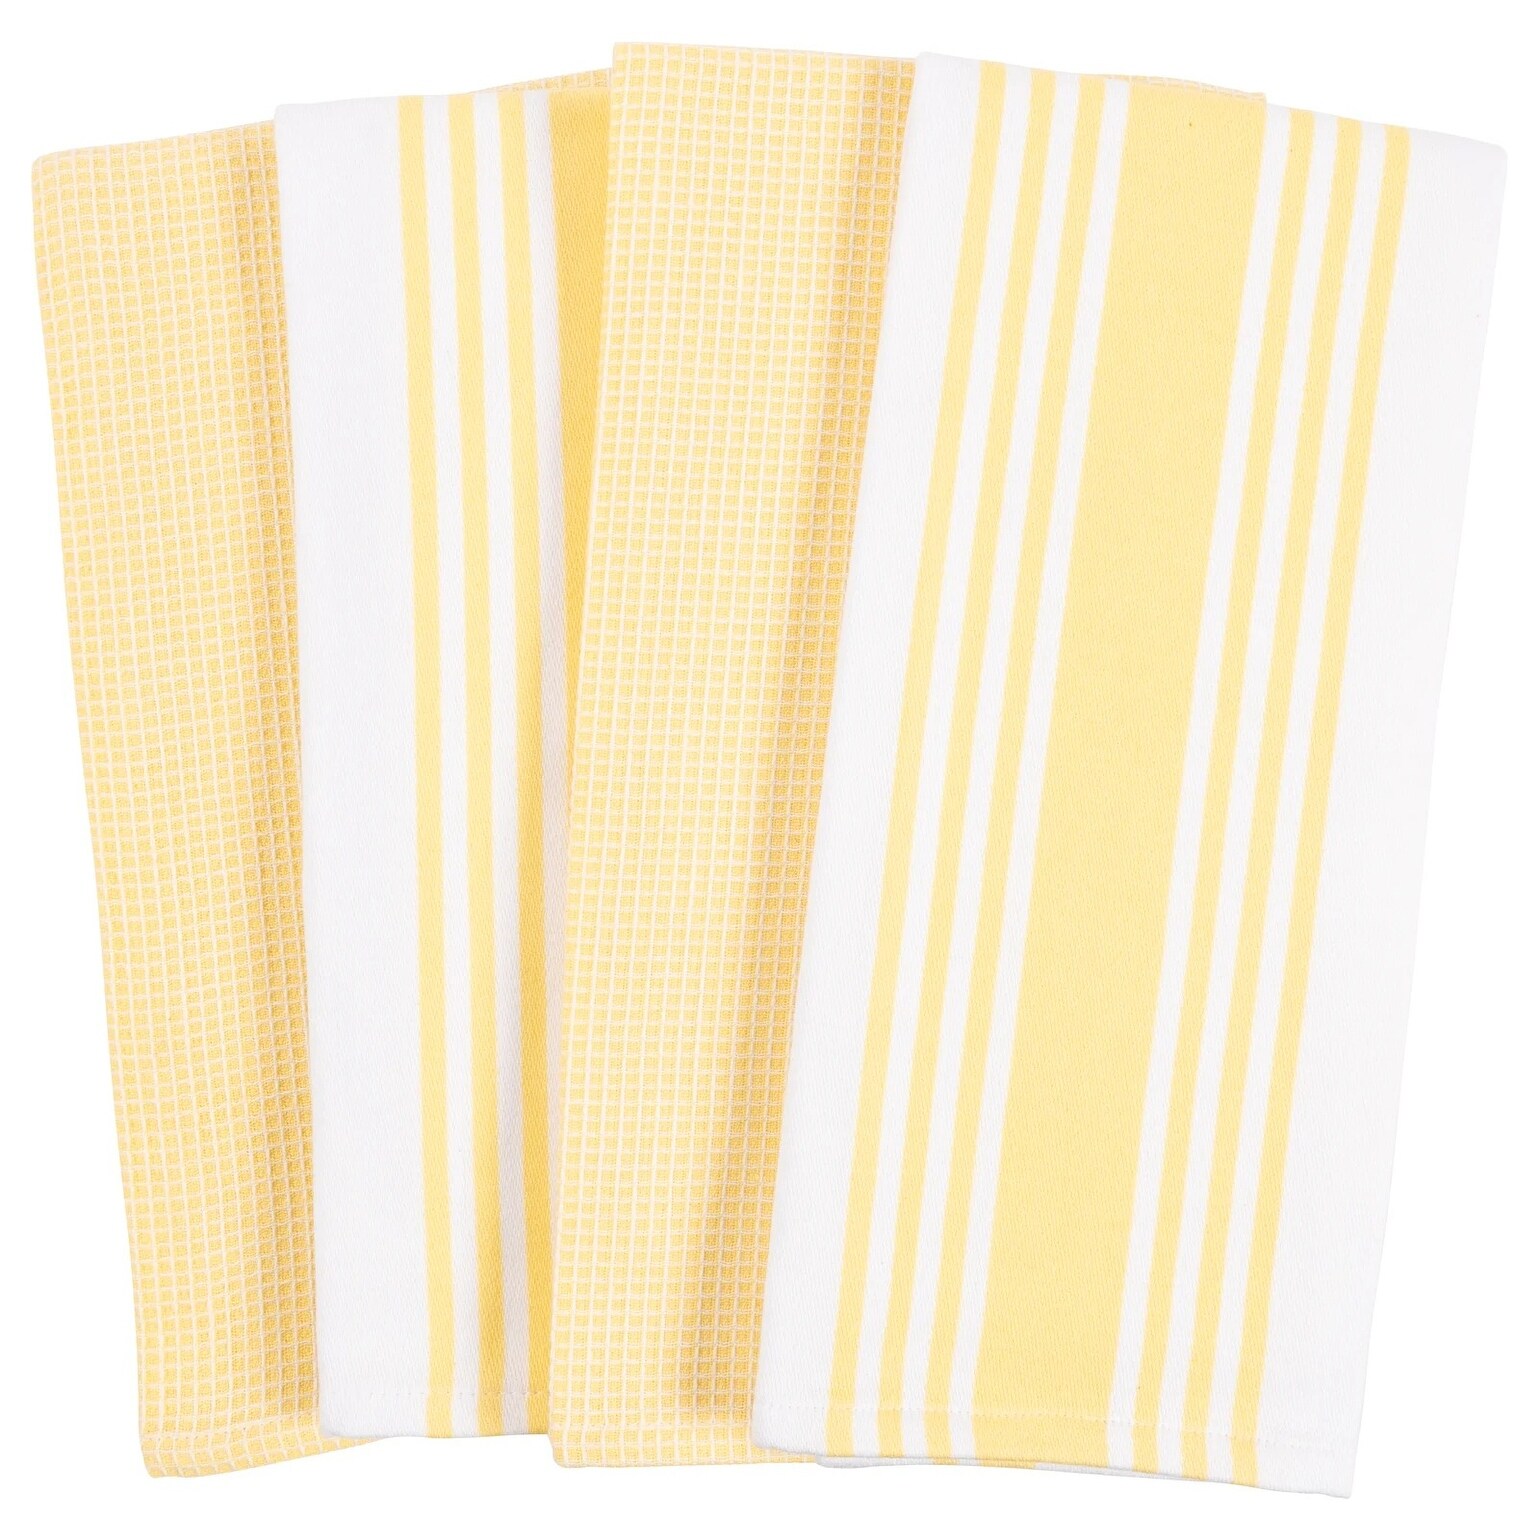 KAF Home Set of 4 Centerband and Waffle Kitchen Towels, 18x28